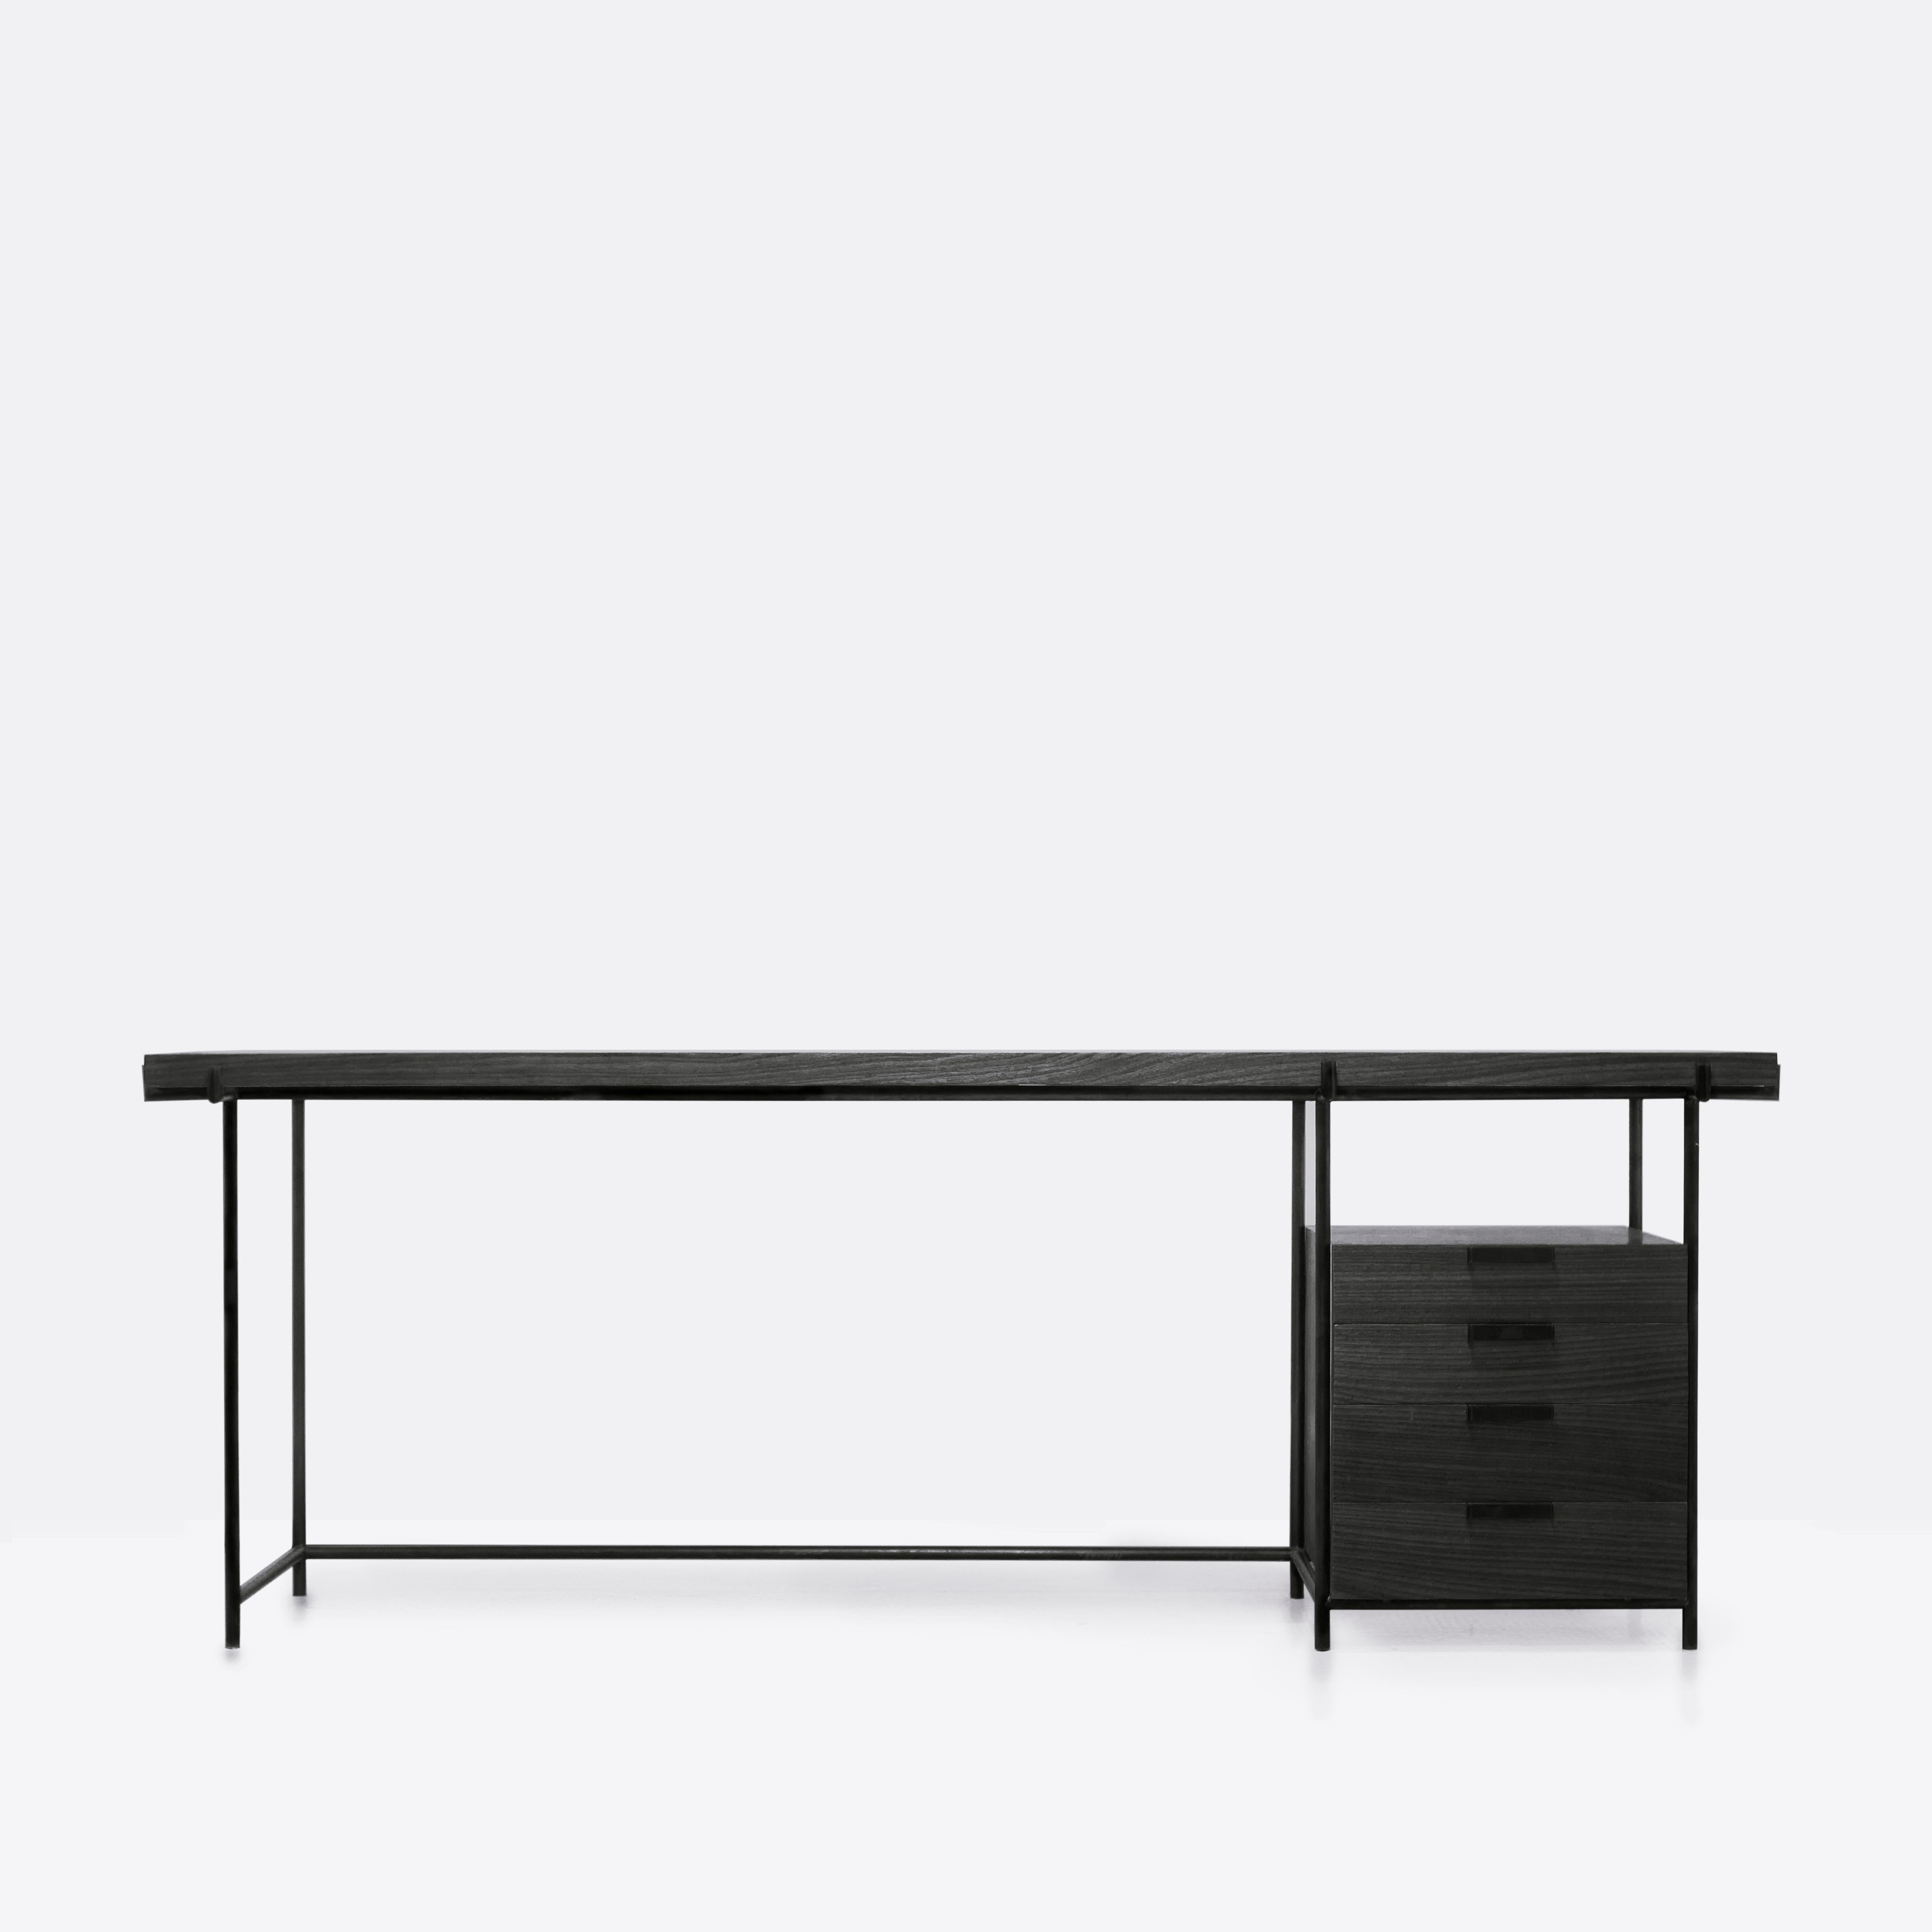 Marajoara desk with drawers and files (optional) is a study on Mid-Century Modern utilitarian furniture, with Brazilian Native Arte Reference.

In tribute to Lina Bo Bardi's design, this desk has a mixed aesthetic of Mid-Century Modernism with a